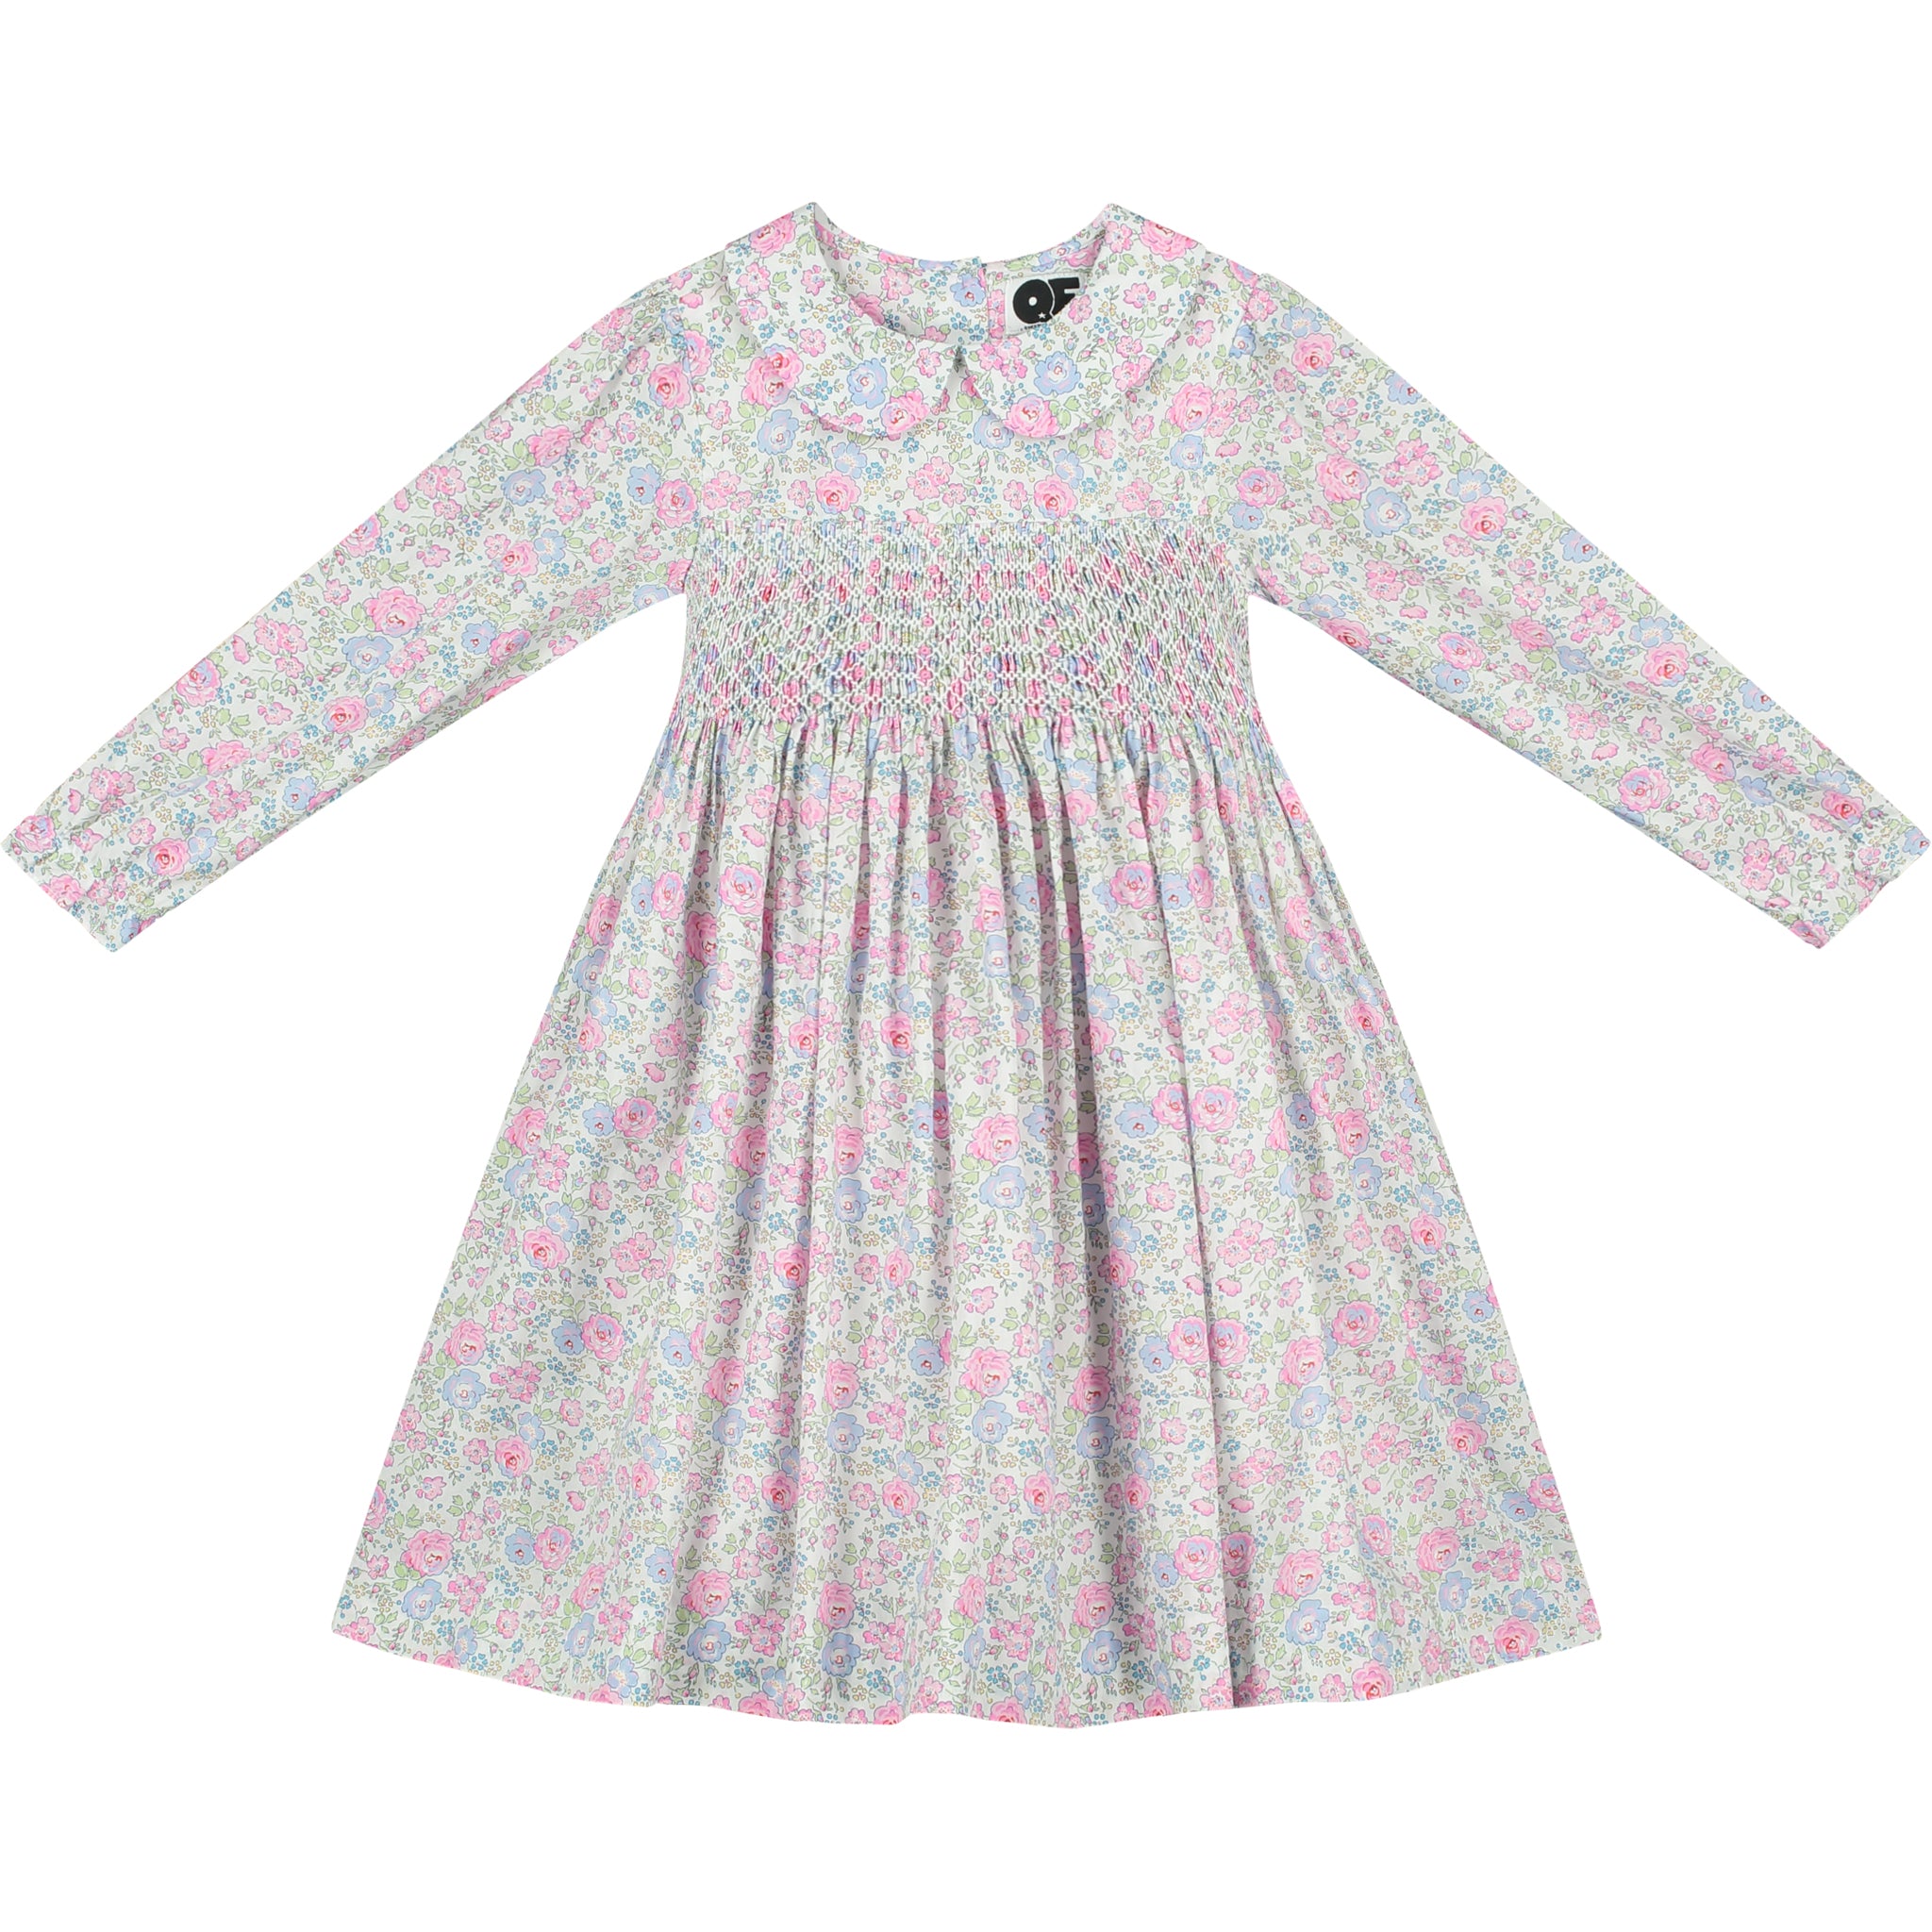 pastel tone floral girls dress made from Liberty fabric